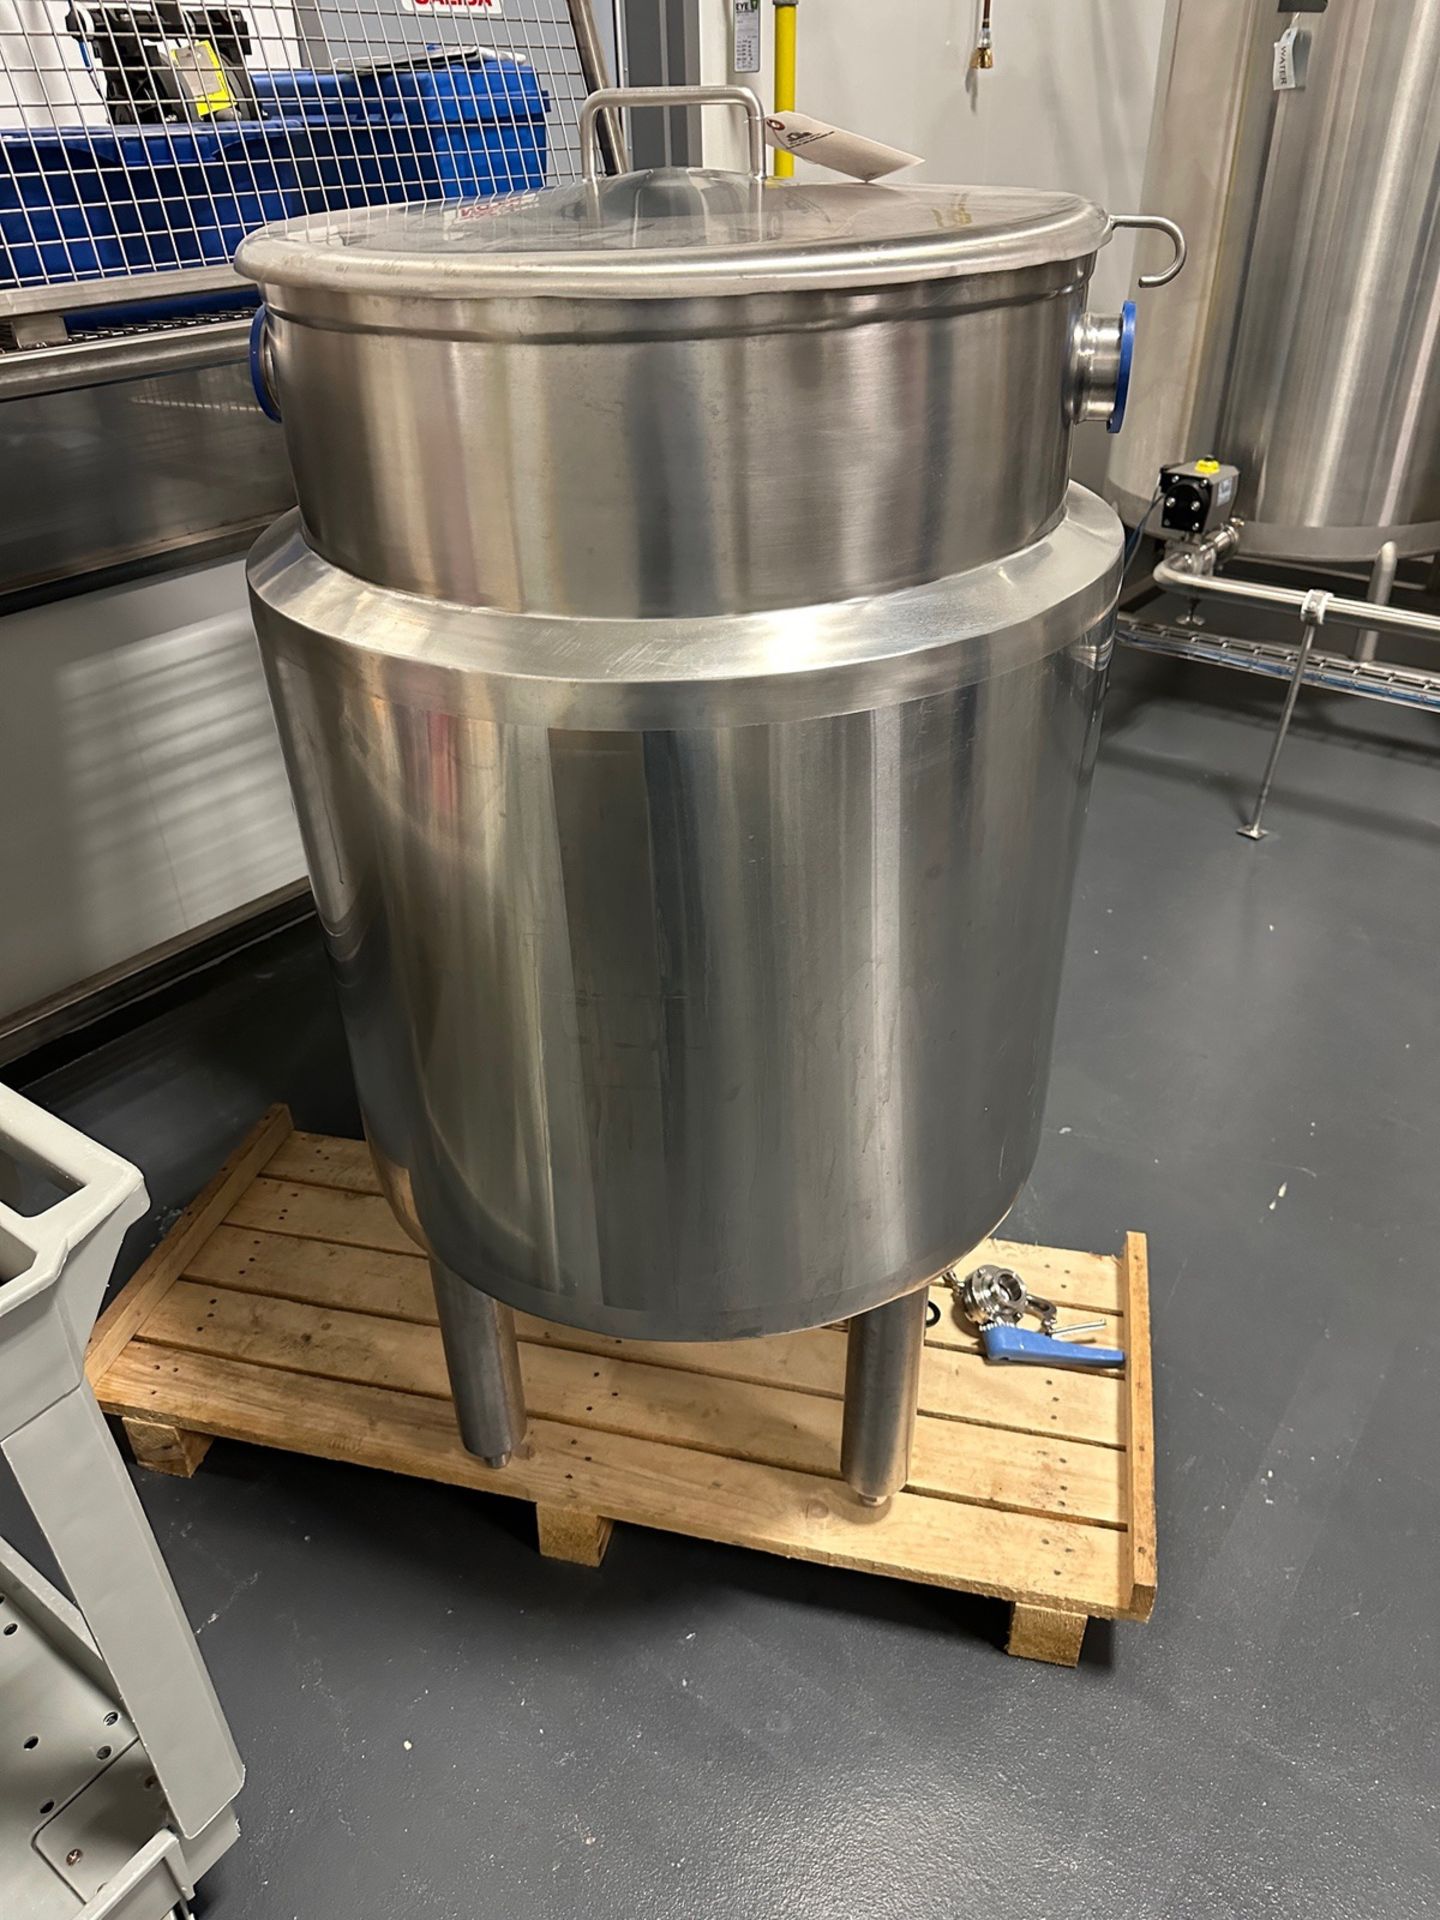 Anco 60 Gallon Stainless Steel Utility Tank - Model PT-OT, S/N 60-2014 (Approx. 30" x 49" O.H.) - Image 2 of 4